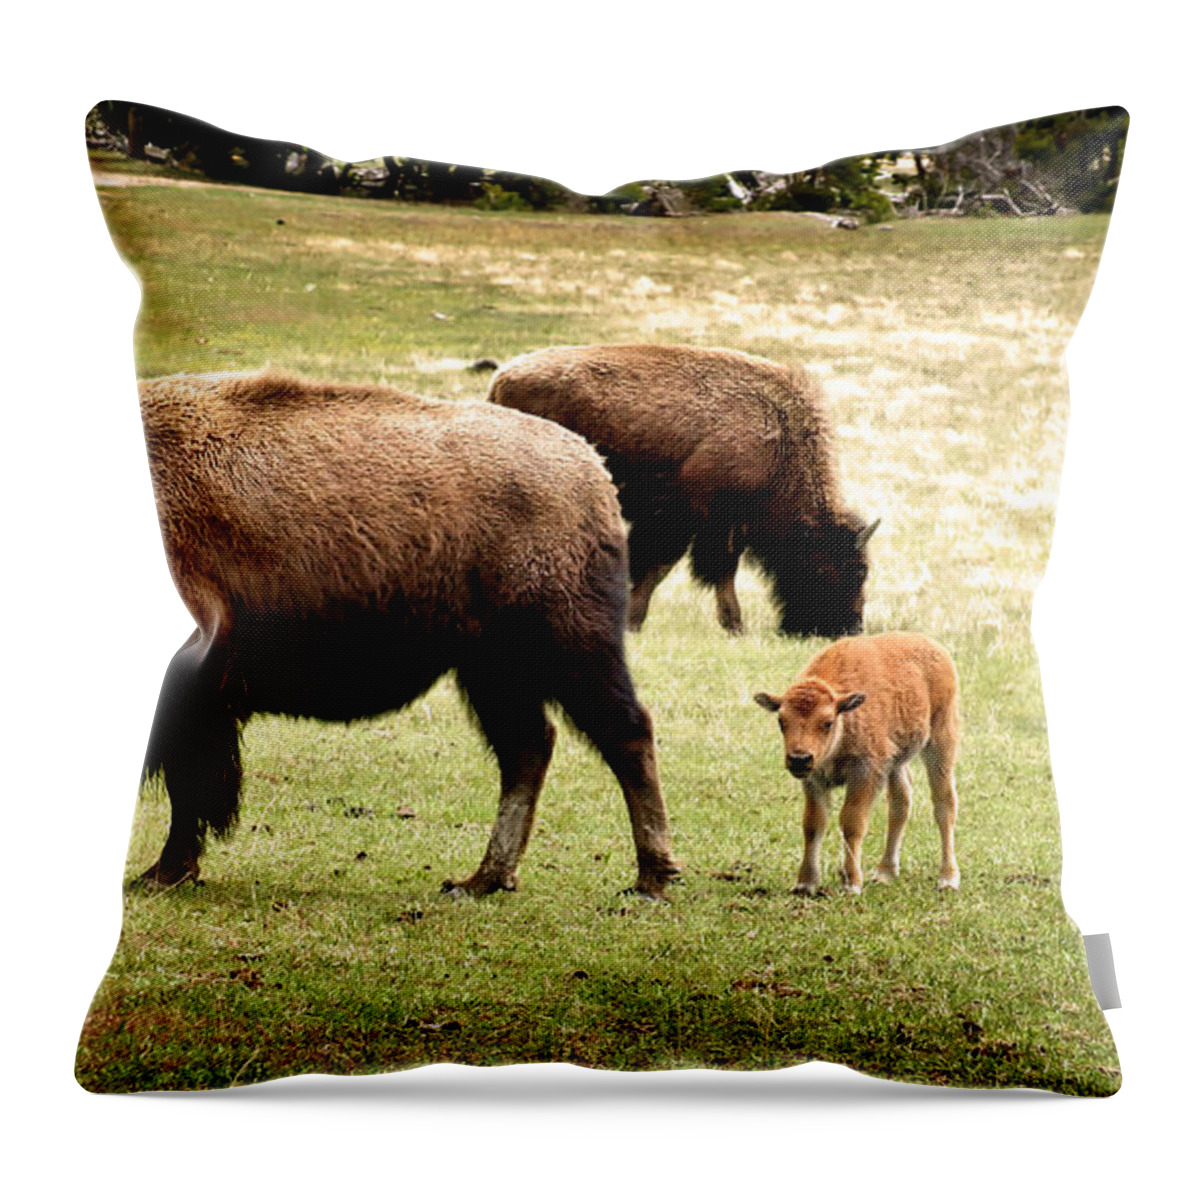 Bison Throw Pillow featuring the photograph The Mighty Bison by Ellen Heaverlo